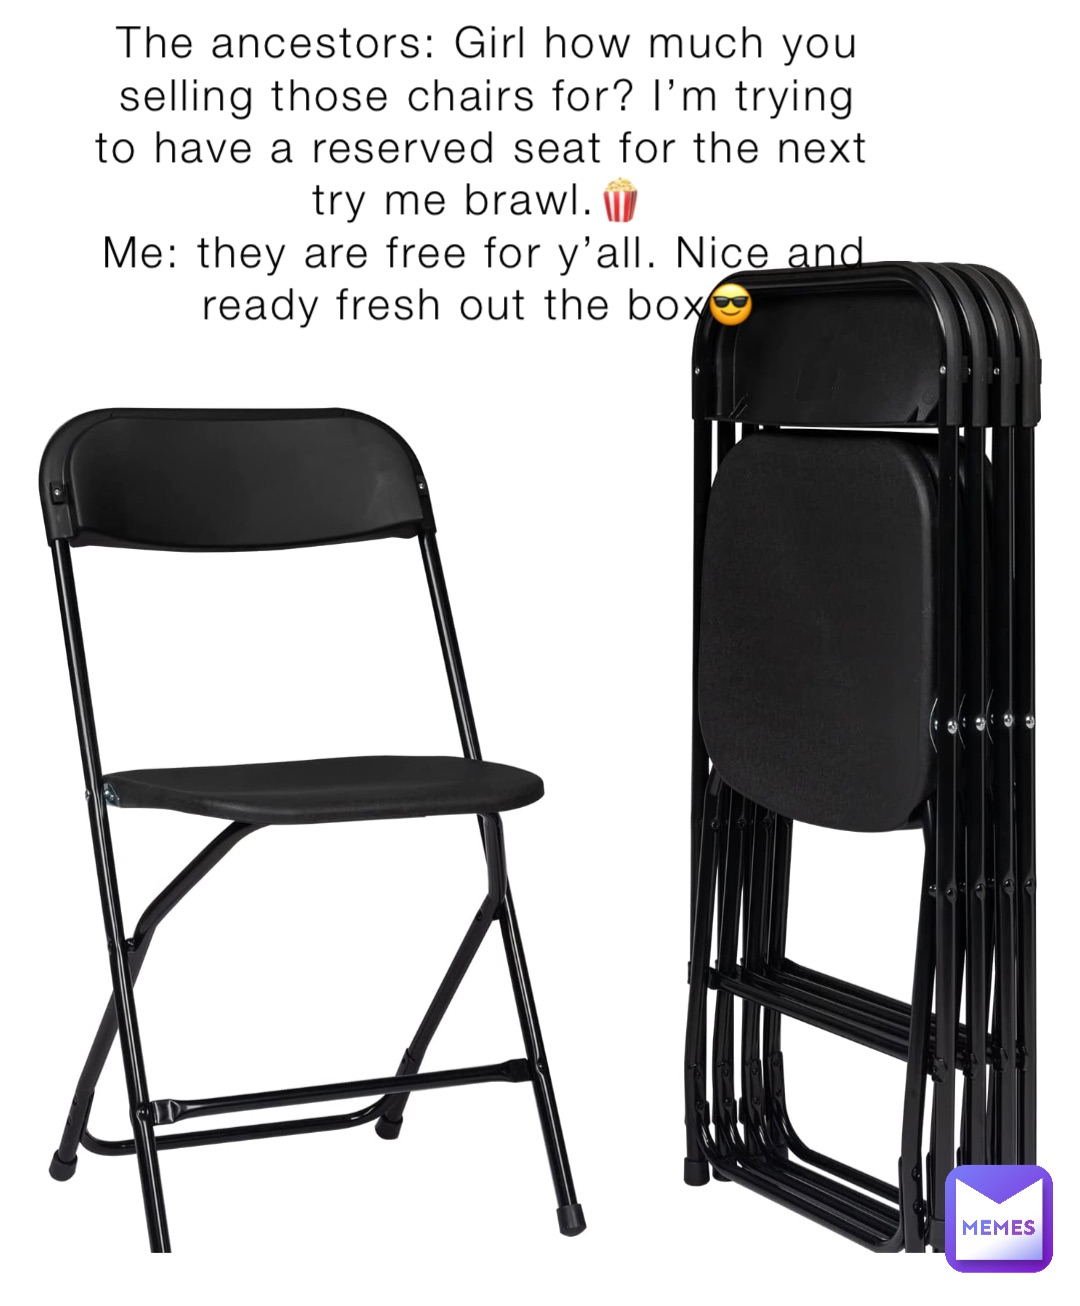 The ancestors: Girl how much you selling those chairs for? I’m trying to have a reserved seat for the next try me brawl.🍿
Me: they are free for y’all. Nice and ready fresh out the box😎